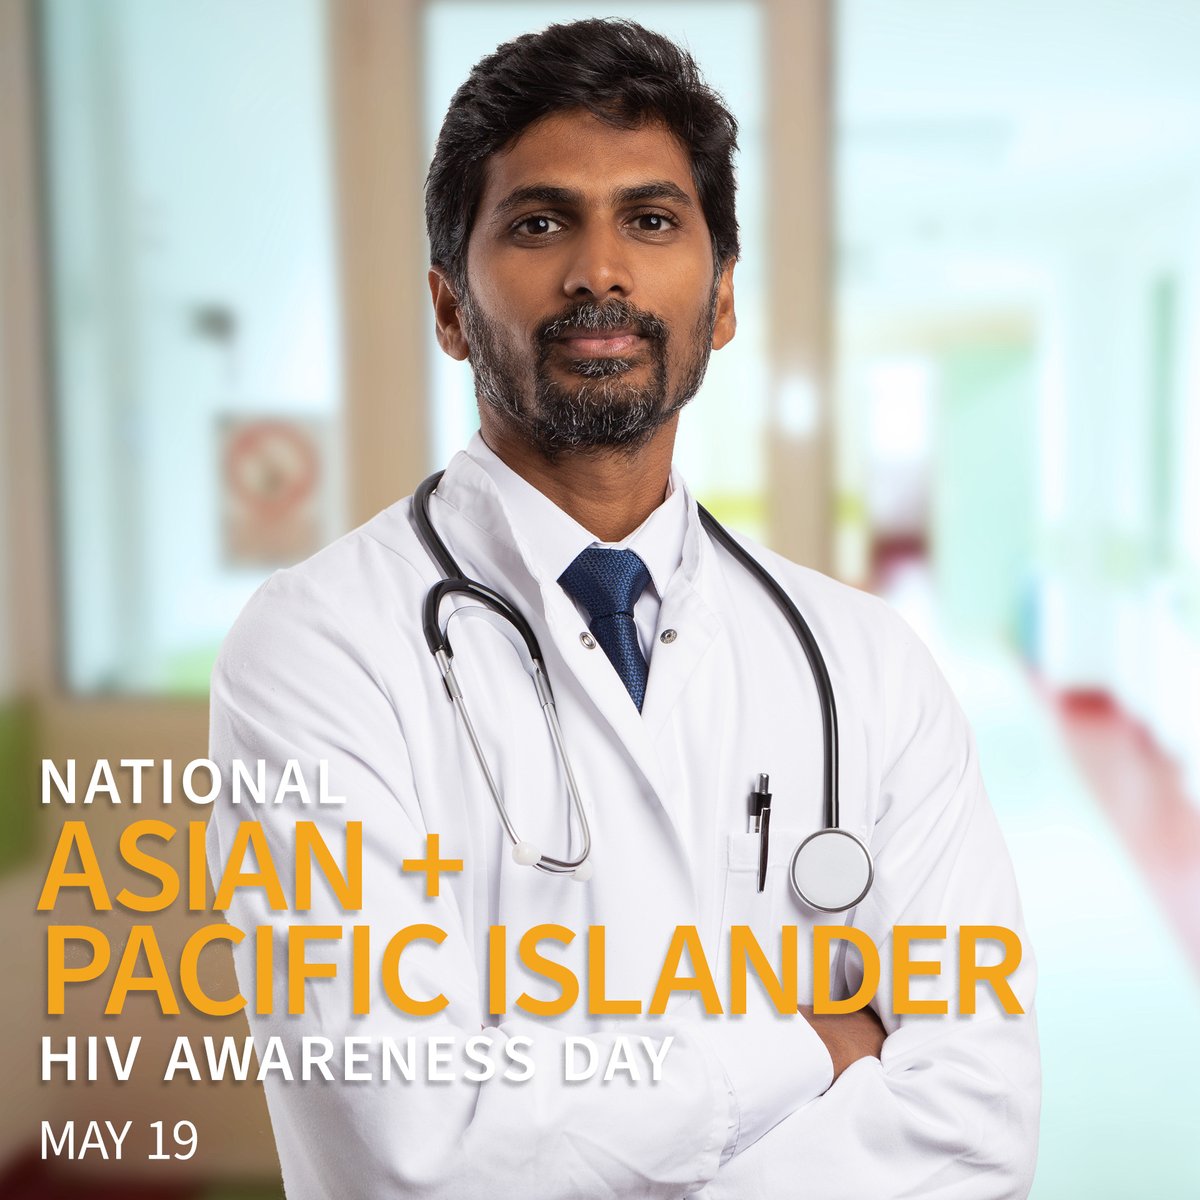 Health care providers: You can help Asian & Pacific Islander communities stay healthy by providing robust HIV screening, prevention, and treatment services. Visit #HIVNexus for free CDC resources for your practice and patients: bit.ly/3n1iF2Q. #NAPIHAAD #APIMay19